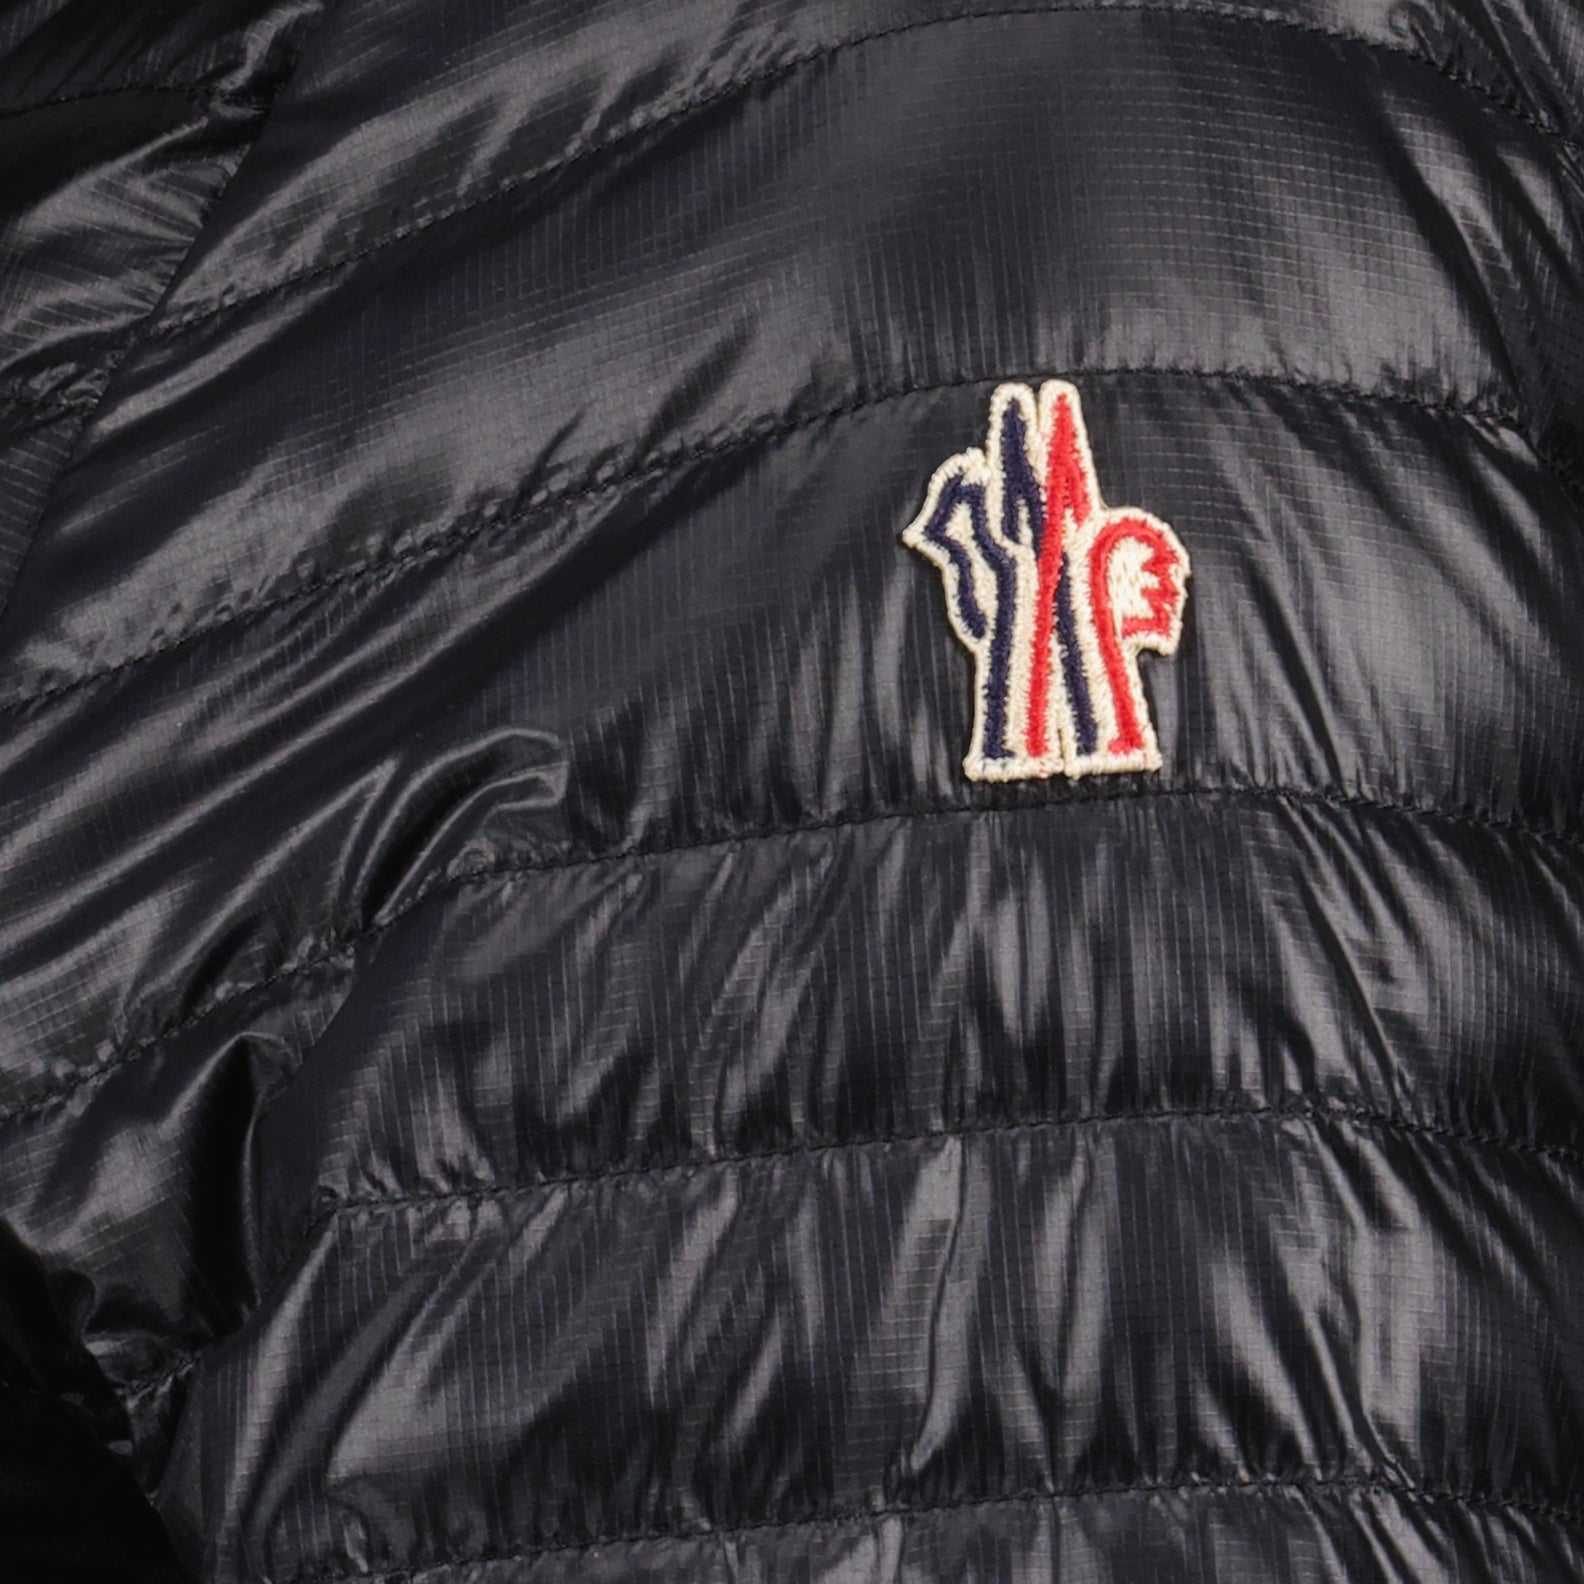 Pontaix quilted jacket